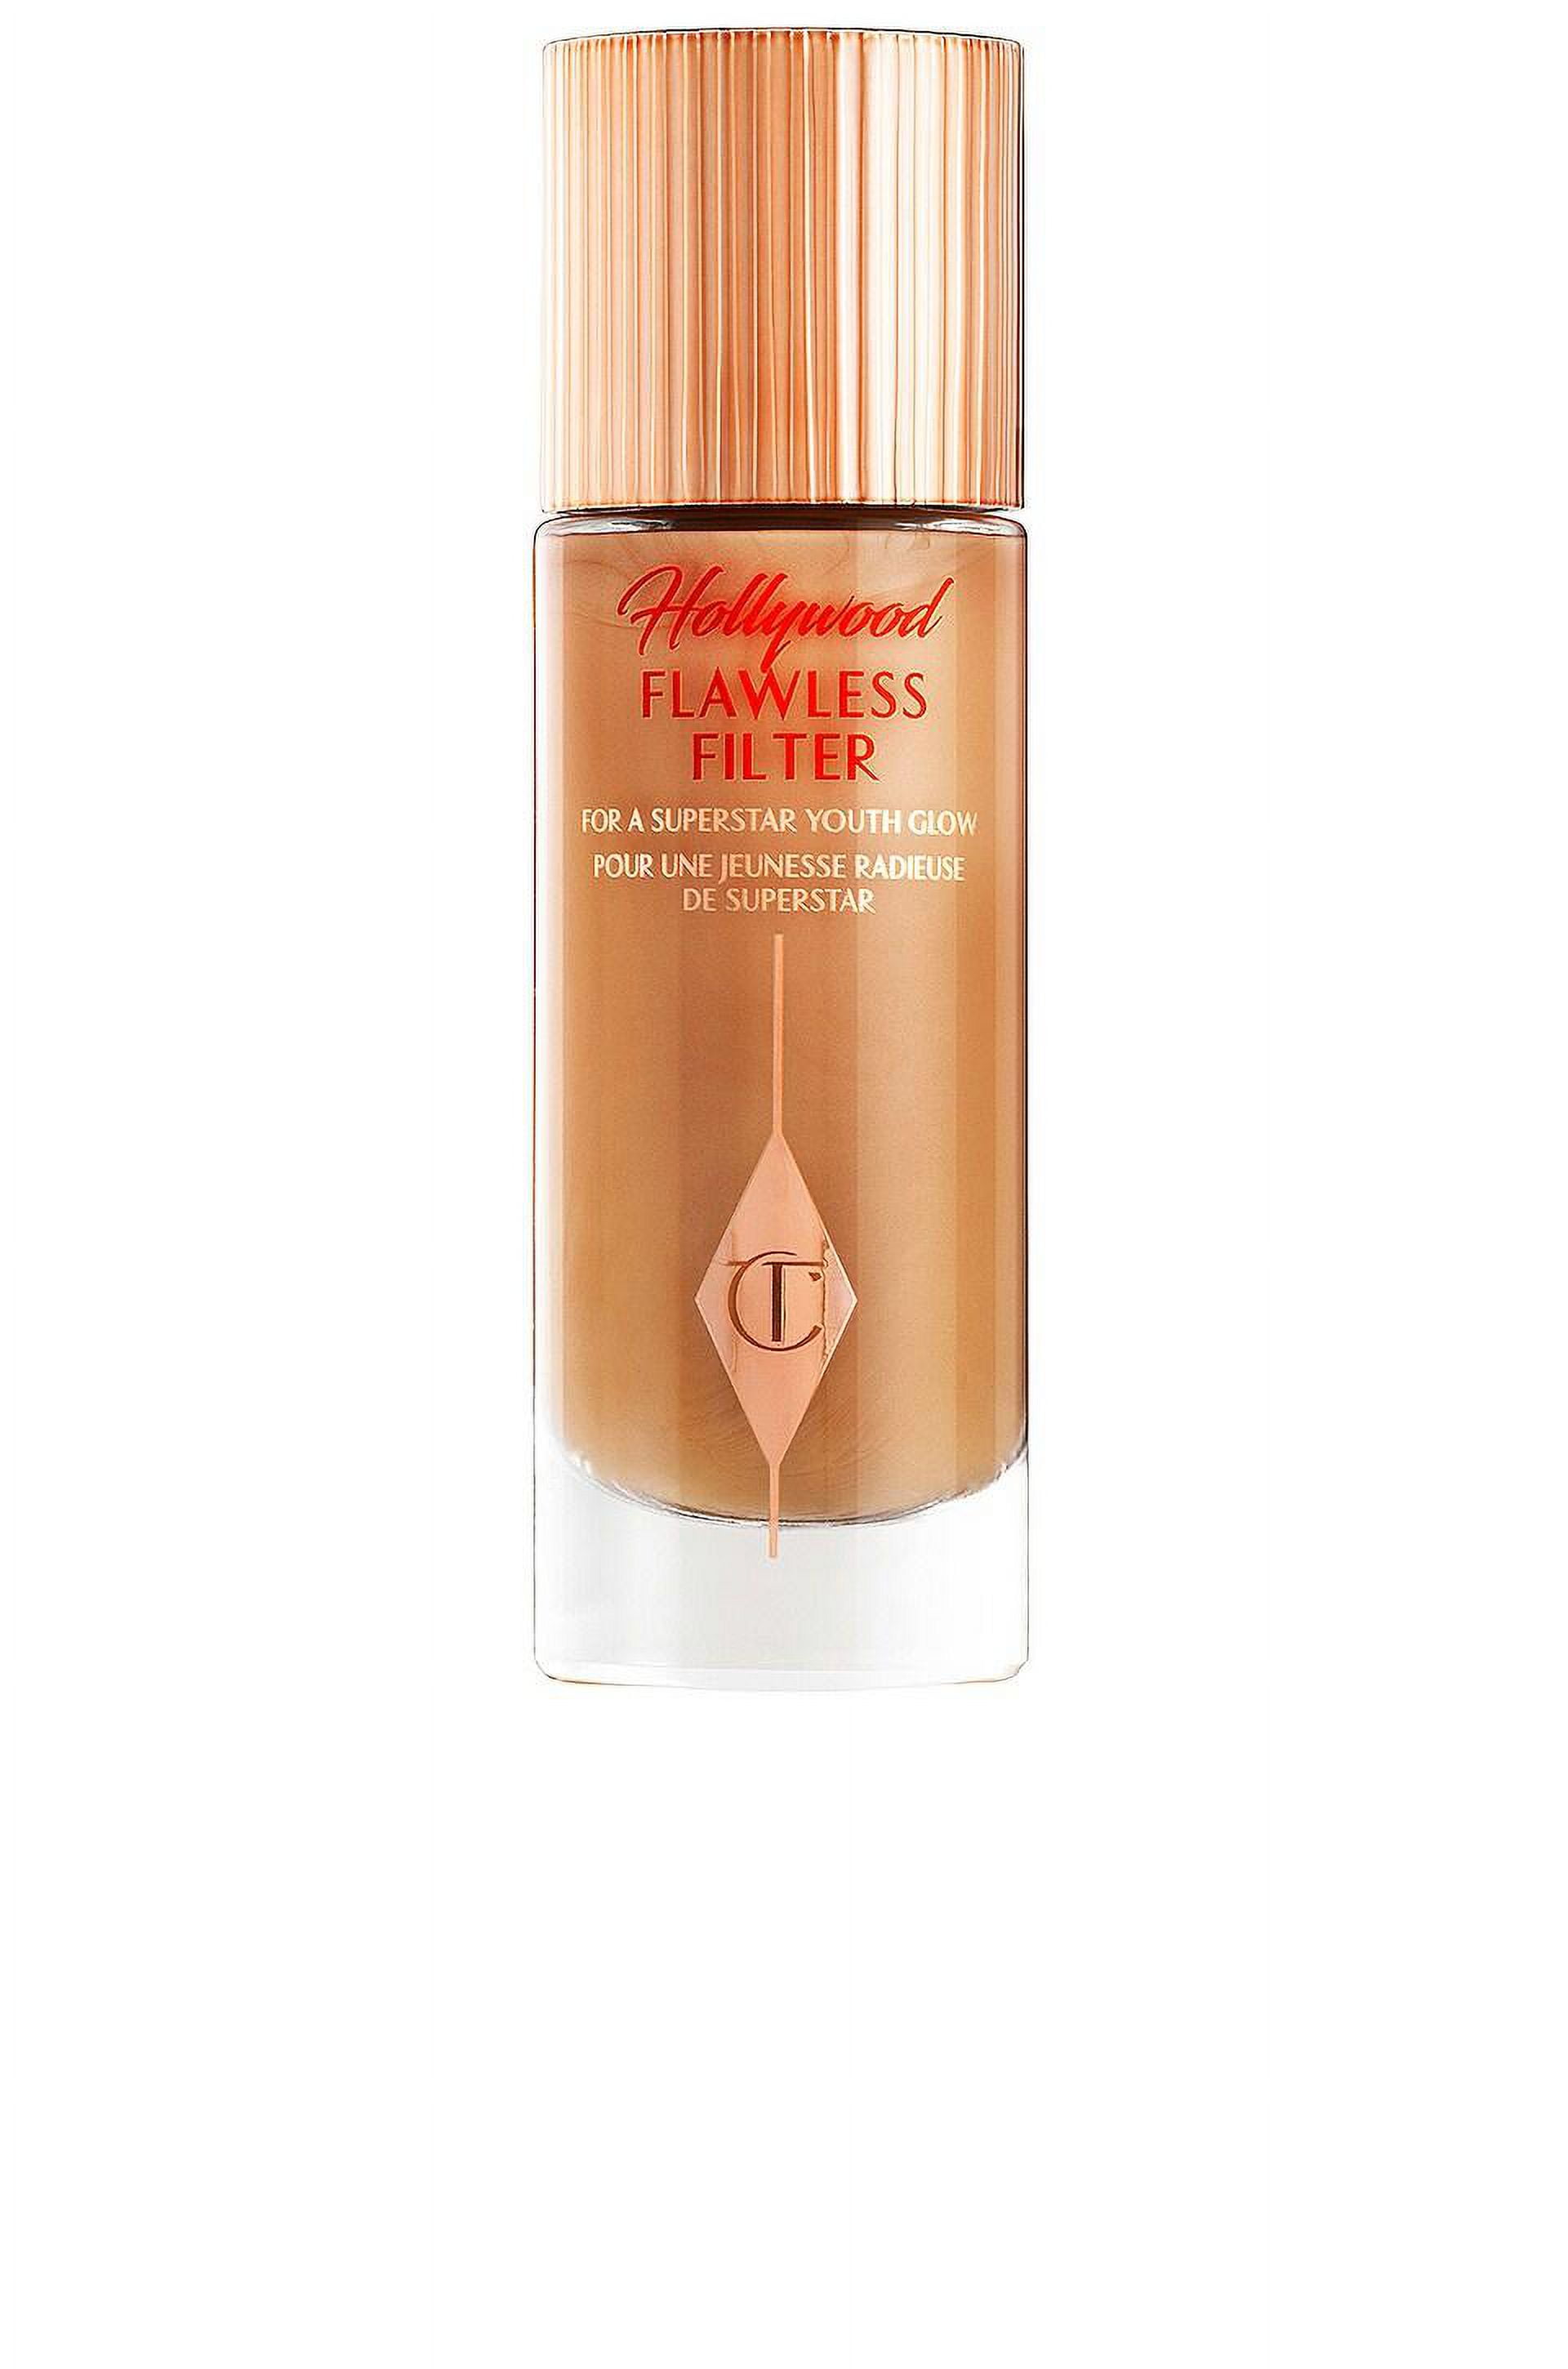  Charlotte Tilbury Hollywood Flawless Filter Face Foundation  Primer & Highlight - 1 oz Full Size (Shade 2) : Beauty & Personal Care